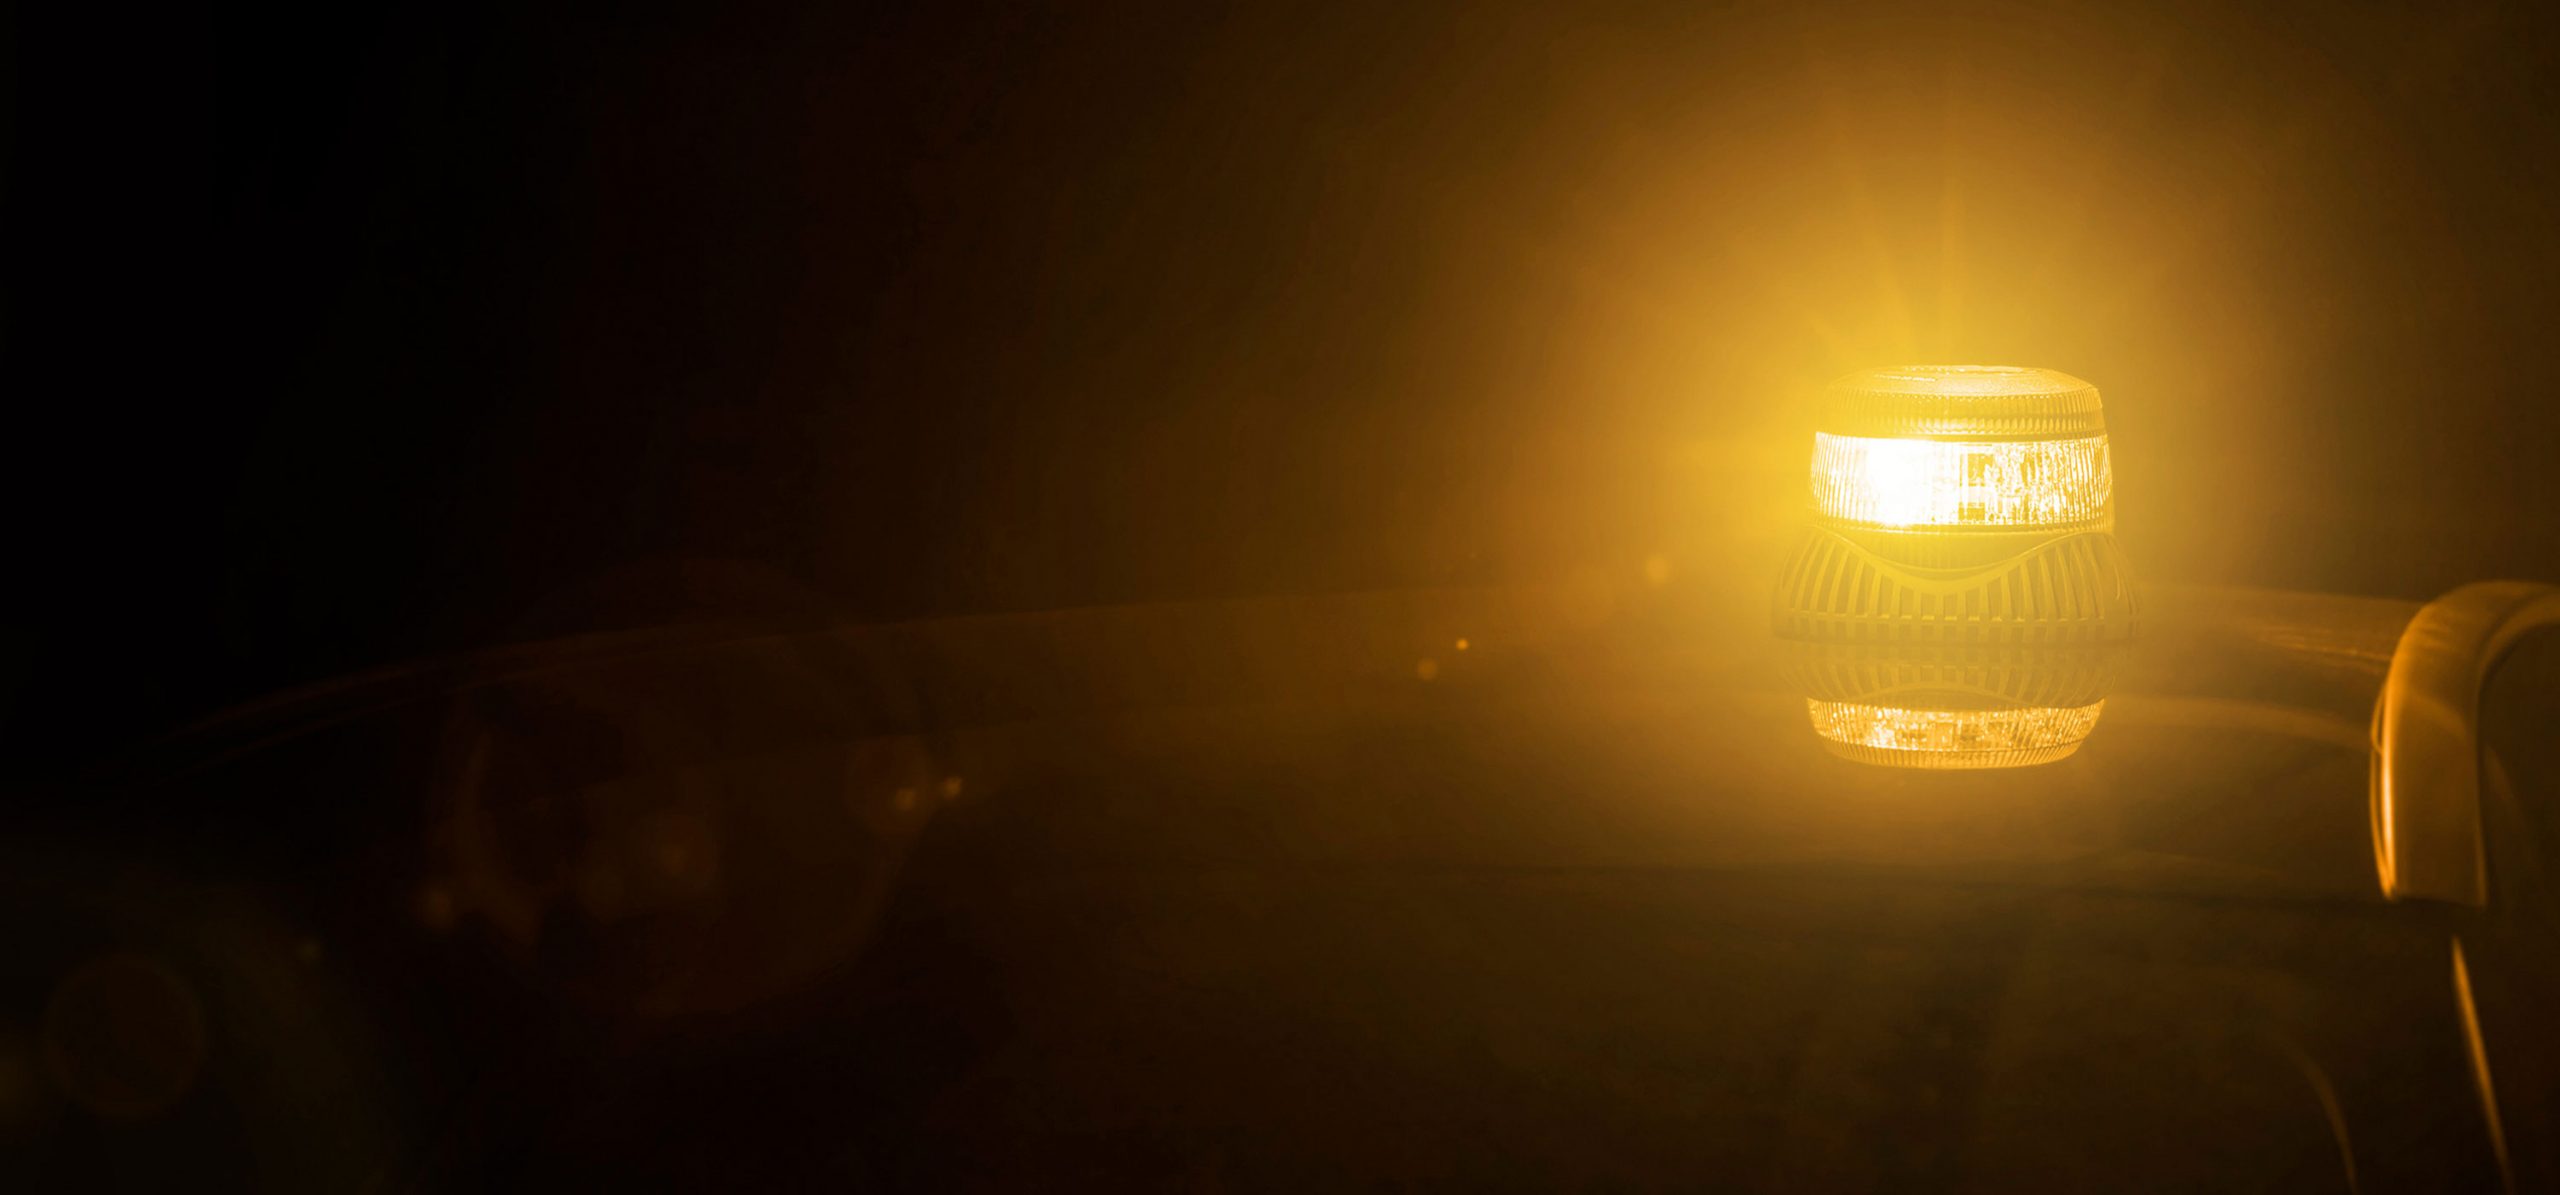 Hero Image of Amber Beacon Lit on Vehicle Roof with Dark Surroundings and Reflection